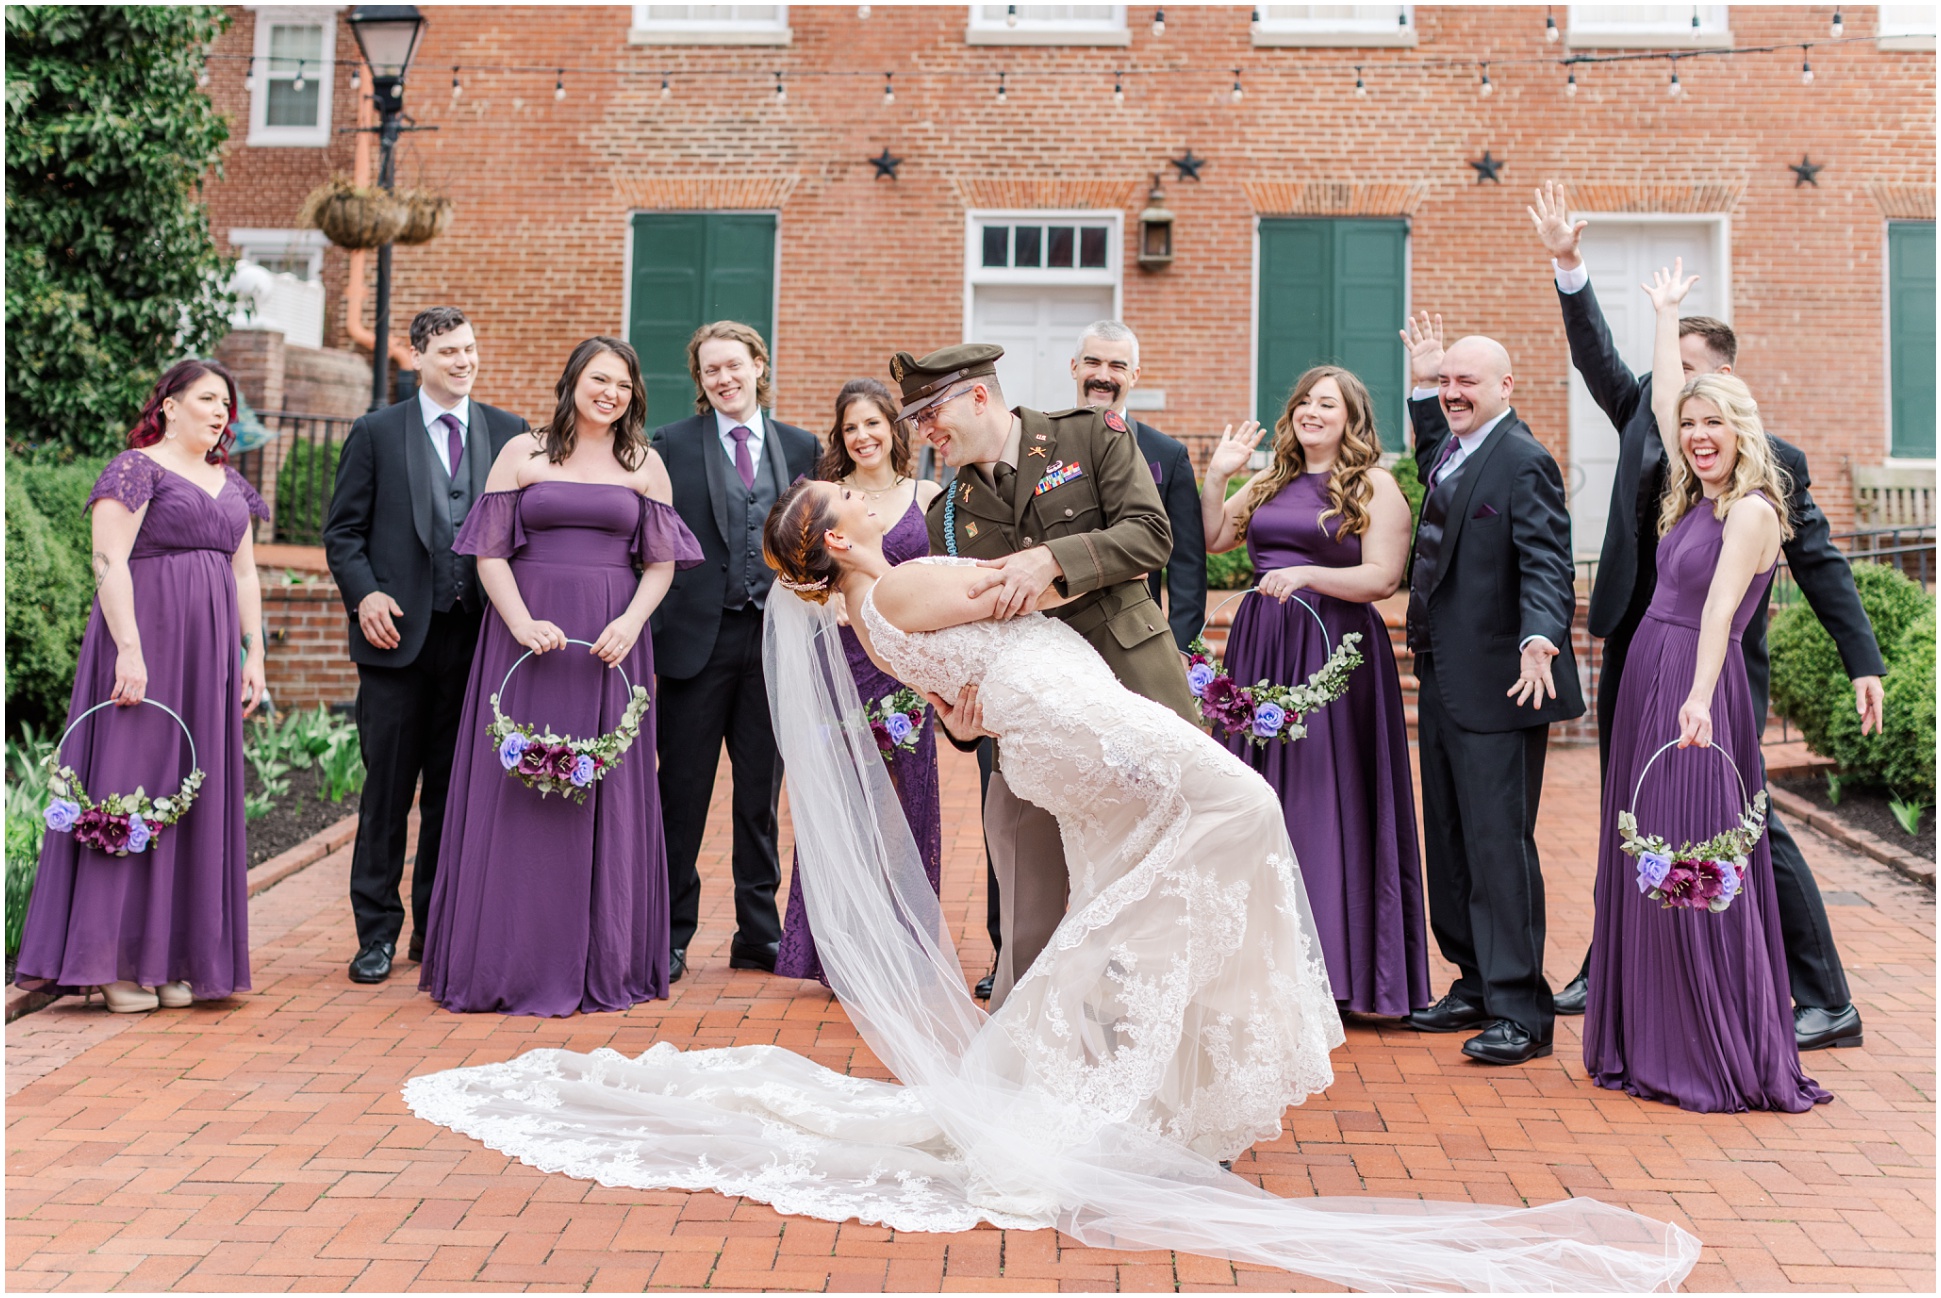 Groom Dipping Bride with Bridal Party behind